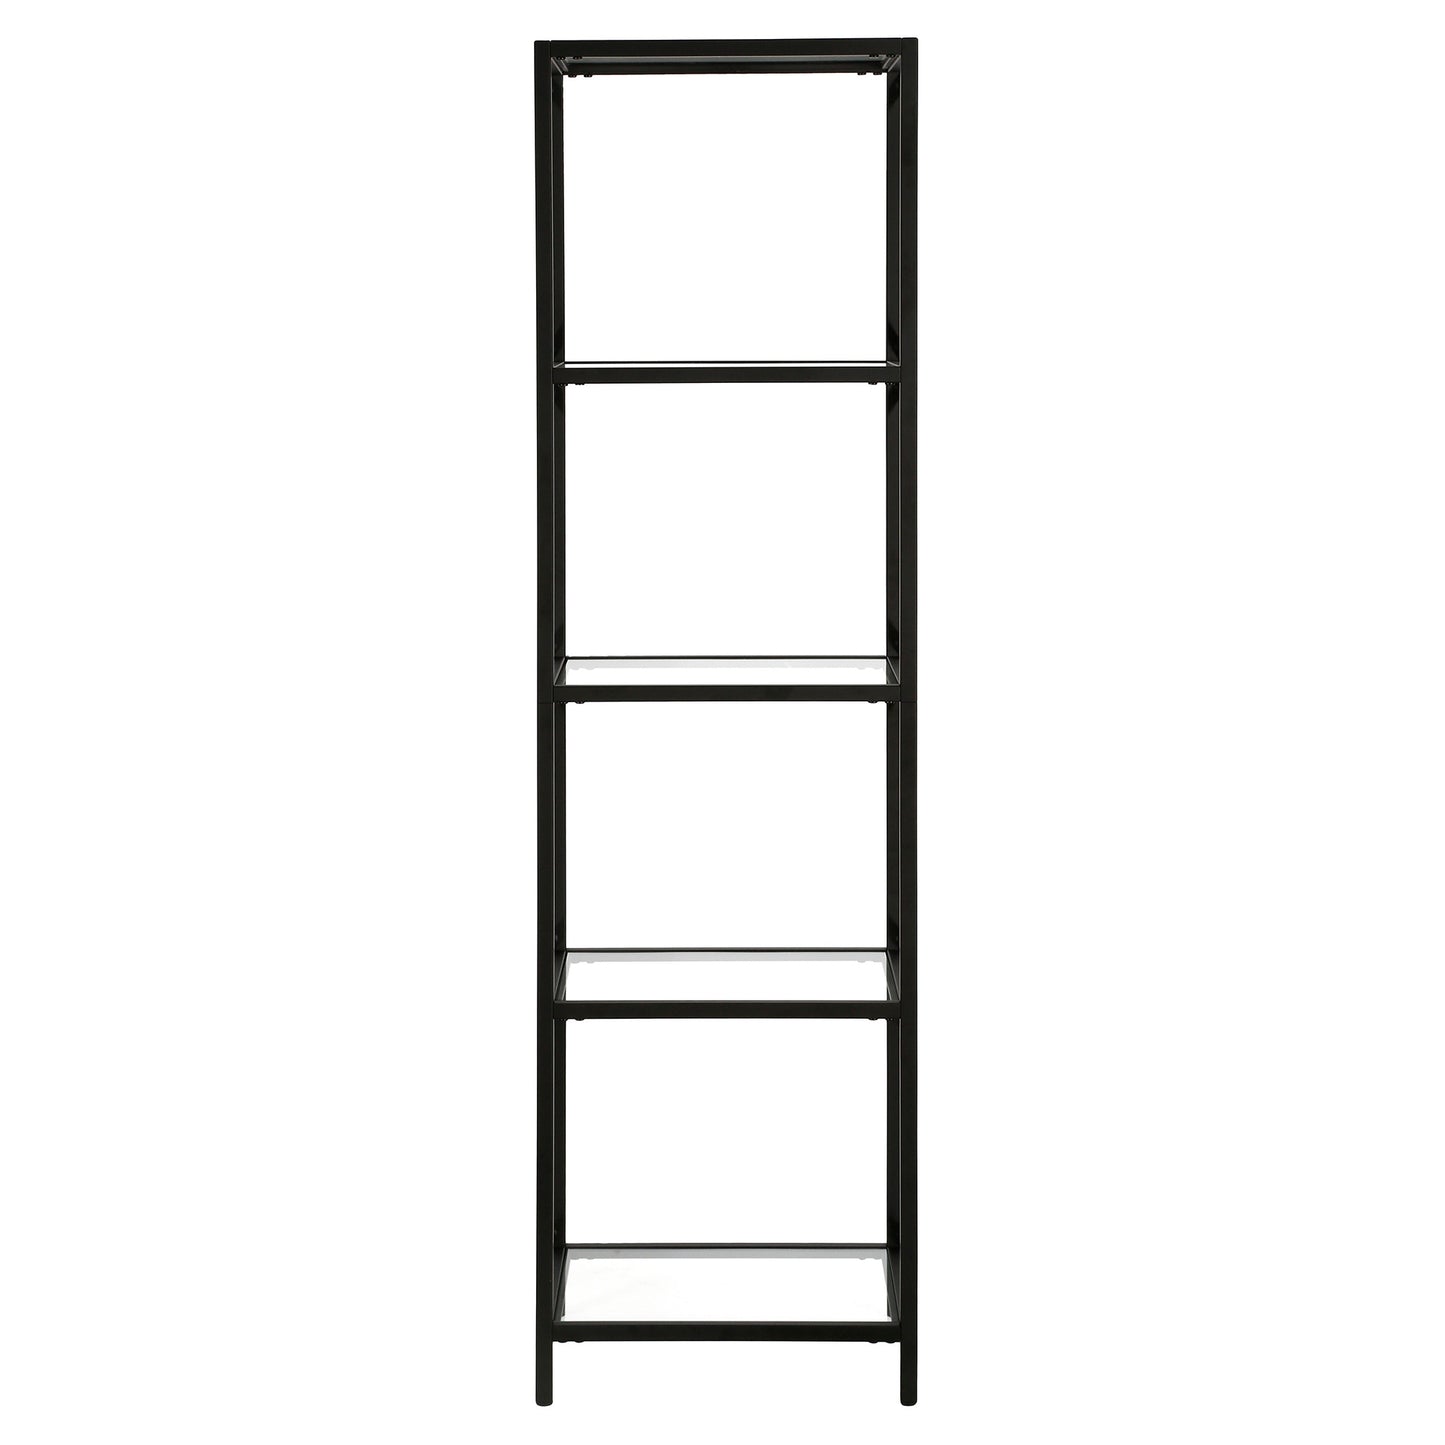 66" Black Metal And Glass Four Tier Etagere Bookcase